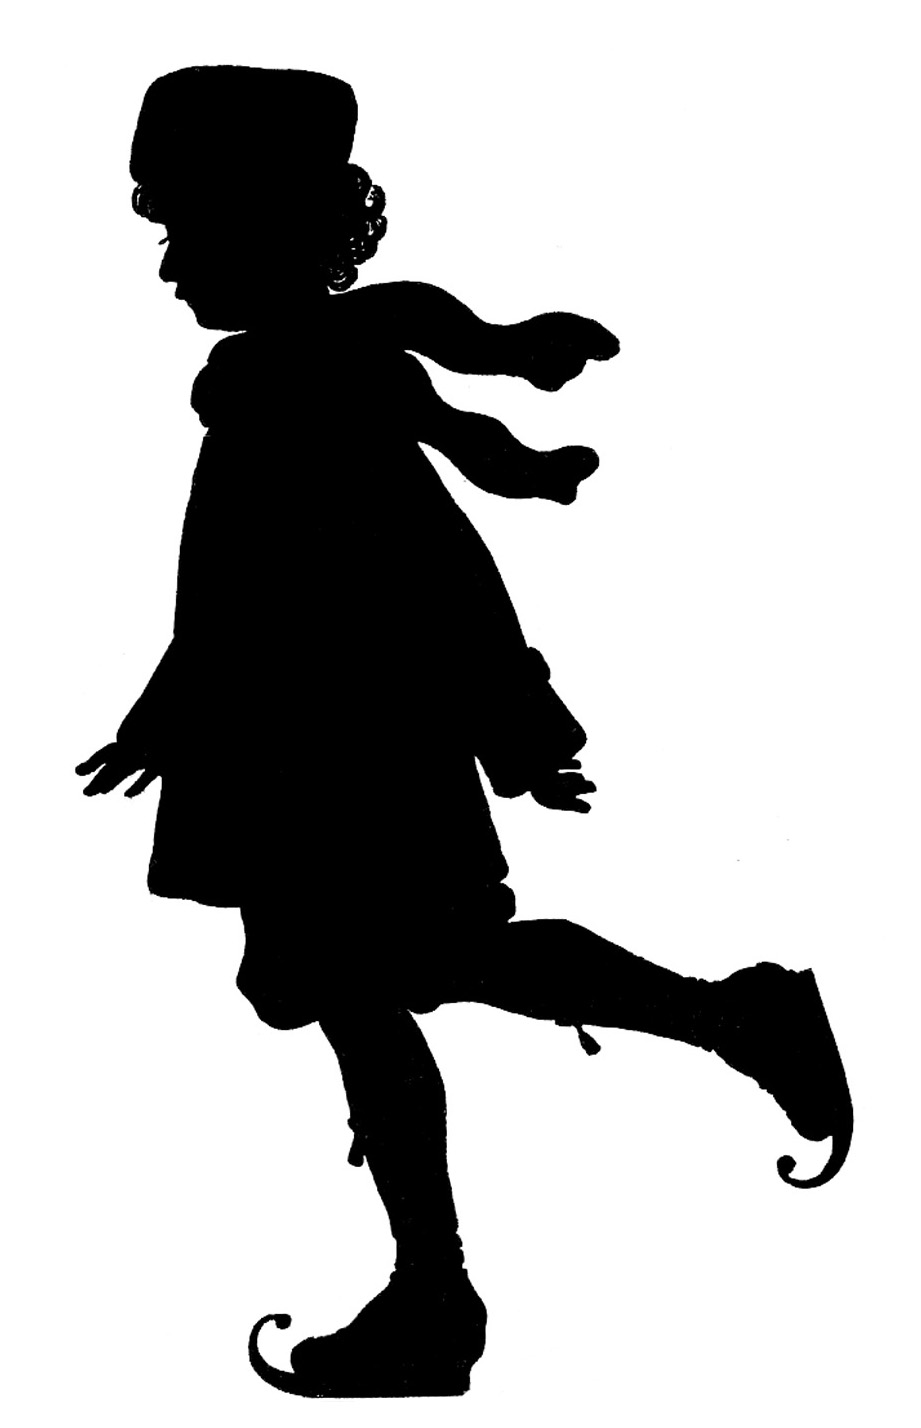 Silhouette-Images-Skating-Boy-GraphicsFairy1 - The Graphics Fairy